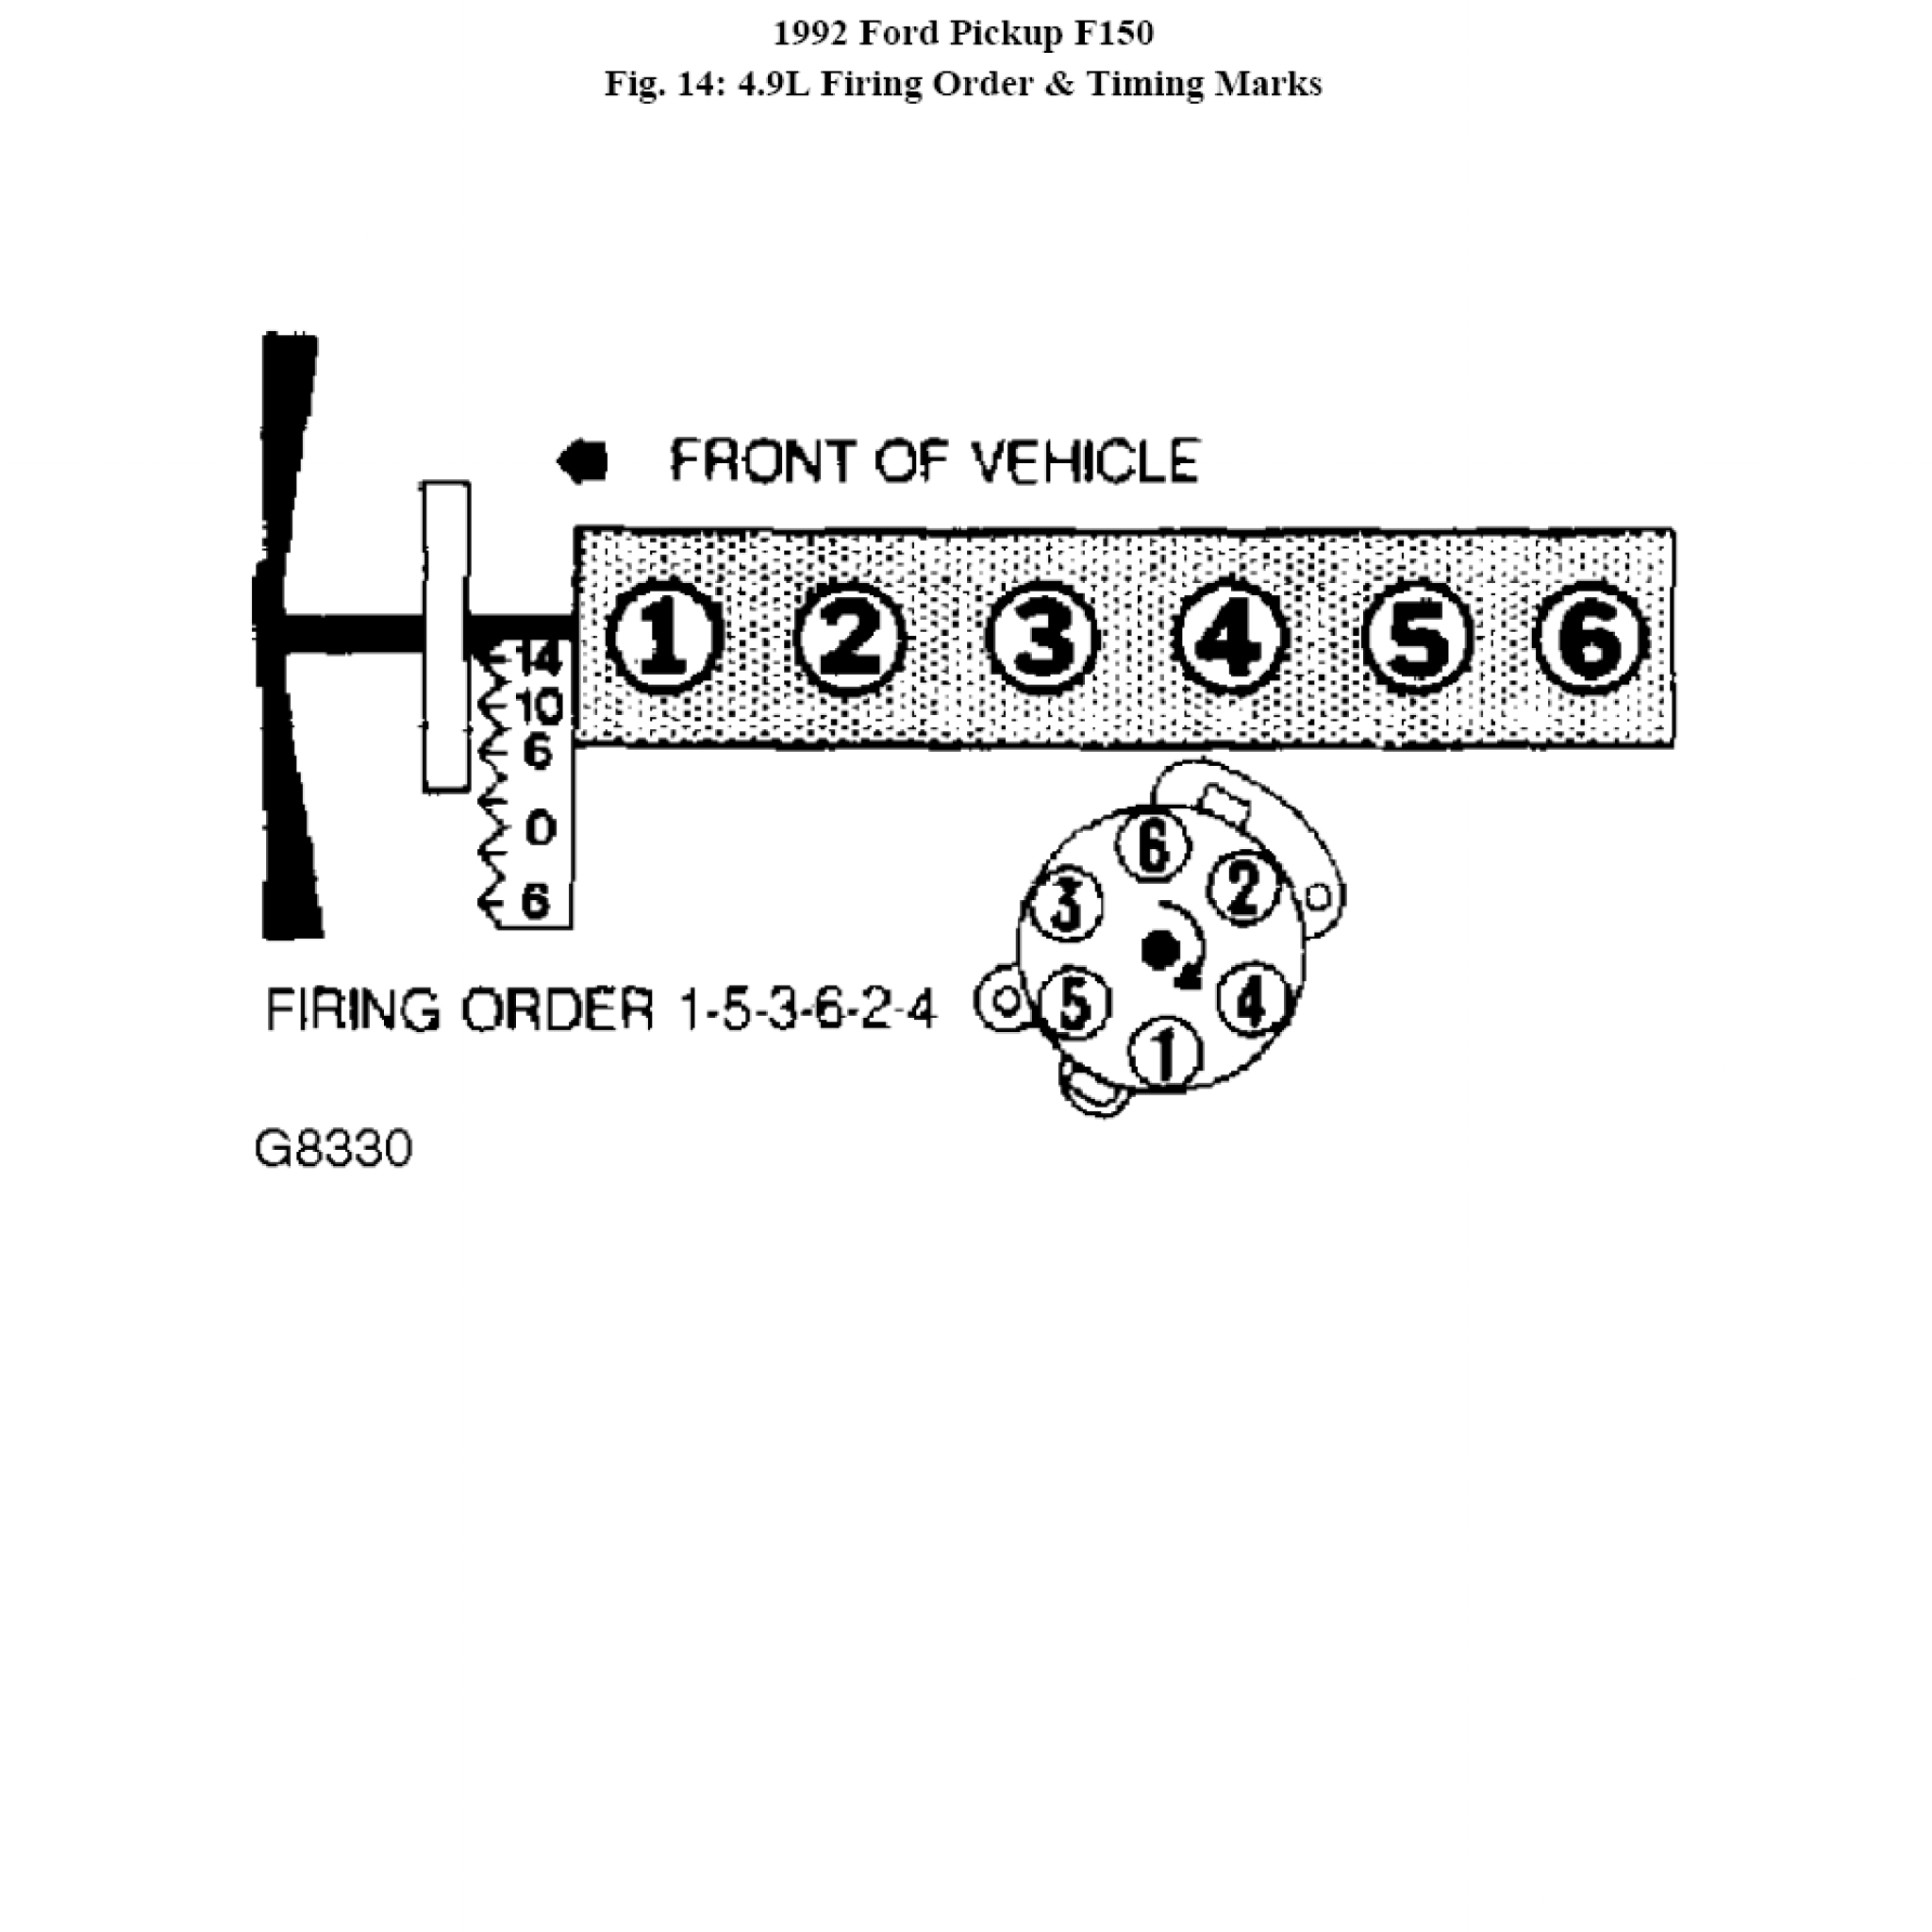 Firing Order Ford 300 6 Cyl | Wiring and Printable